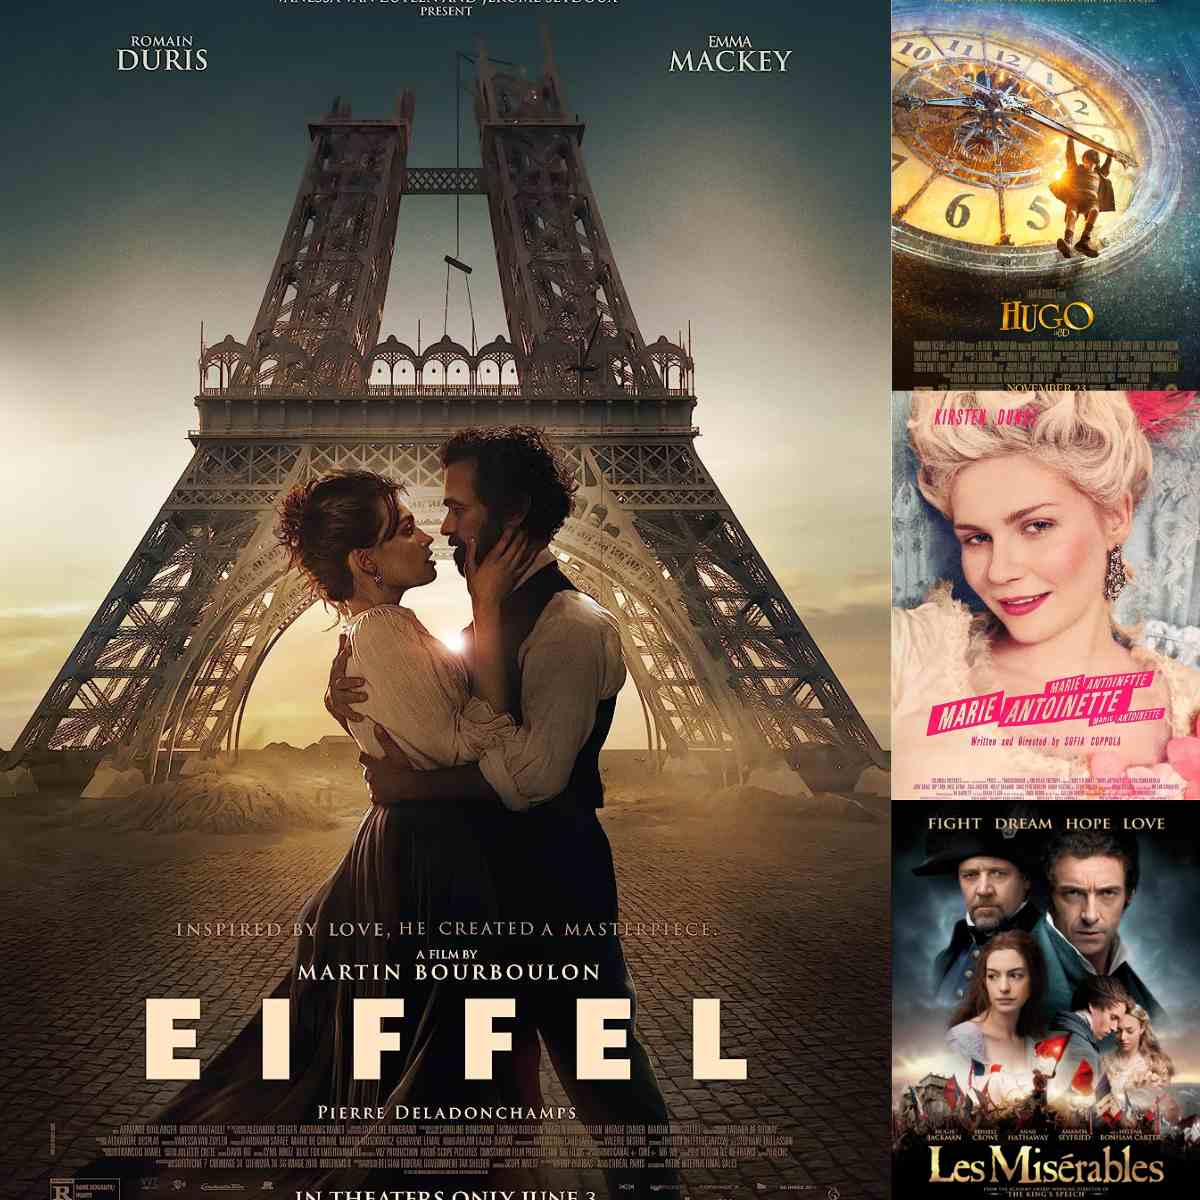 The photo collage shows several movie posters for movies set in Paris.